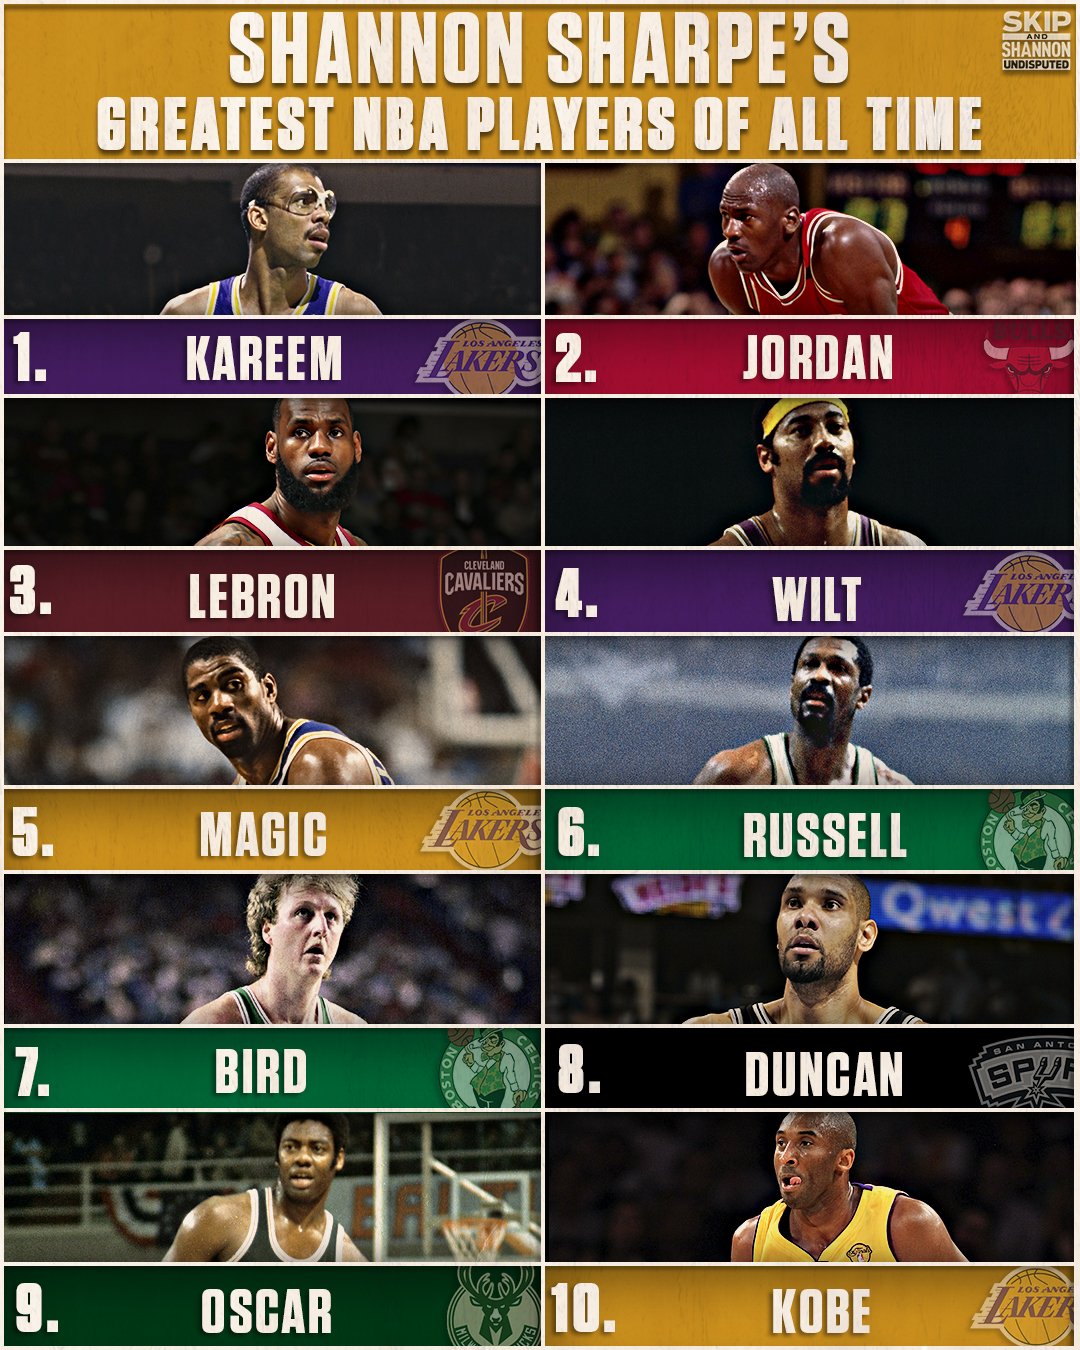 Ranking the Best NBA Players: Top 10 of All Time